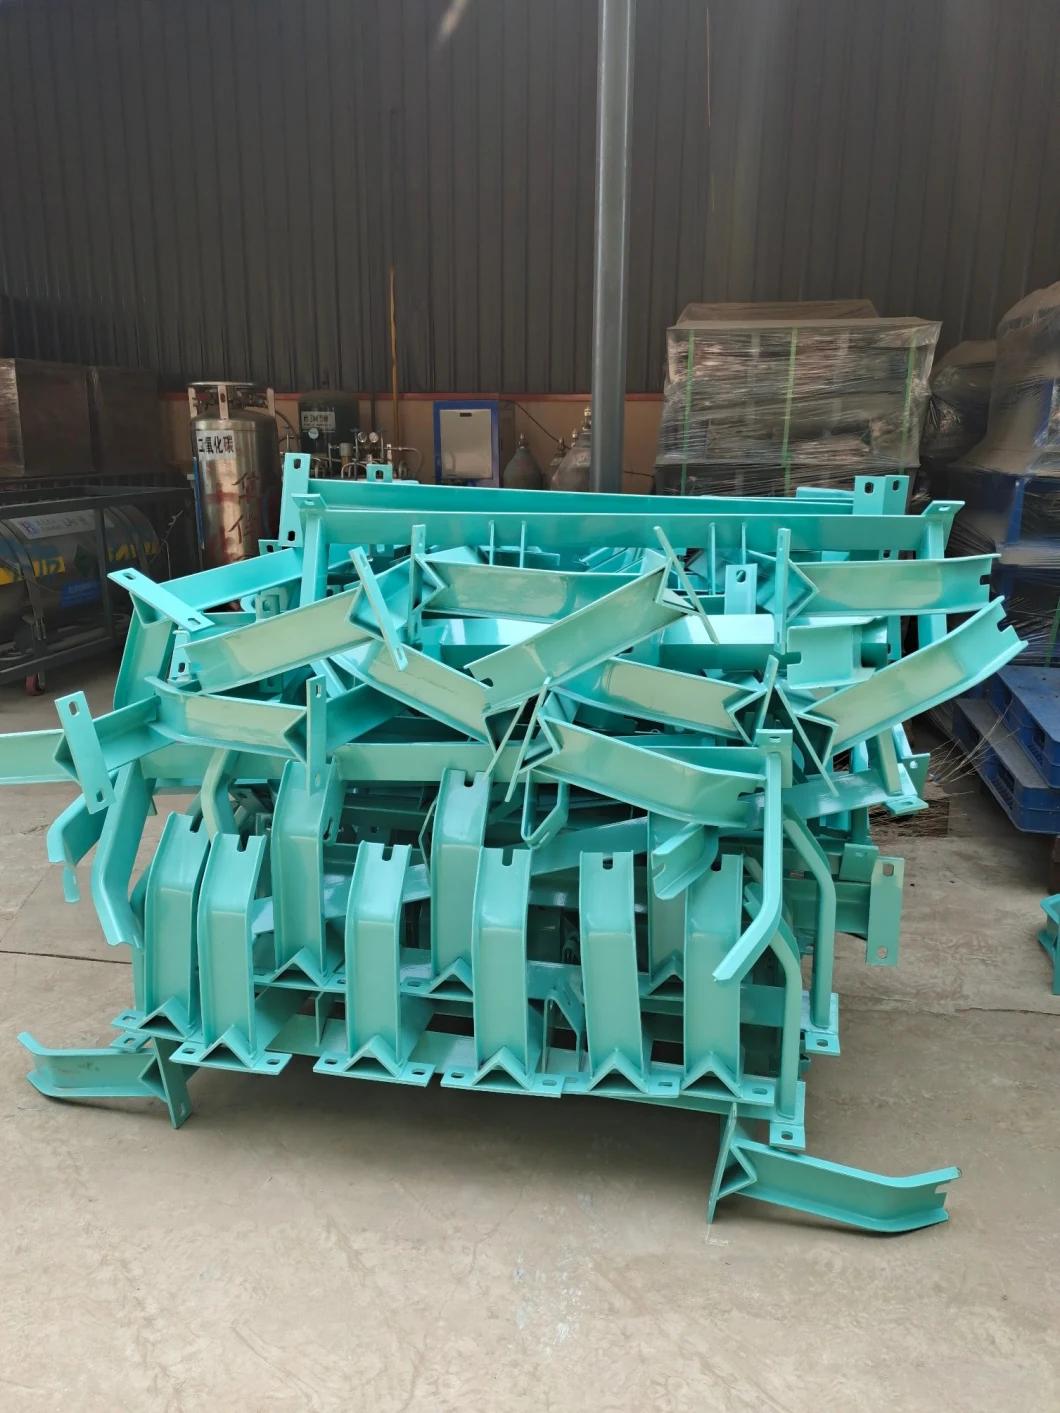 Factory Price Conveyor Bracket Stand Manufacturer Supply Mining Industry